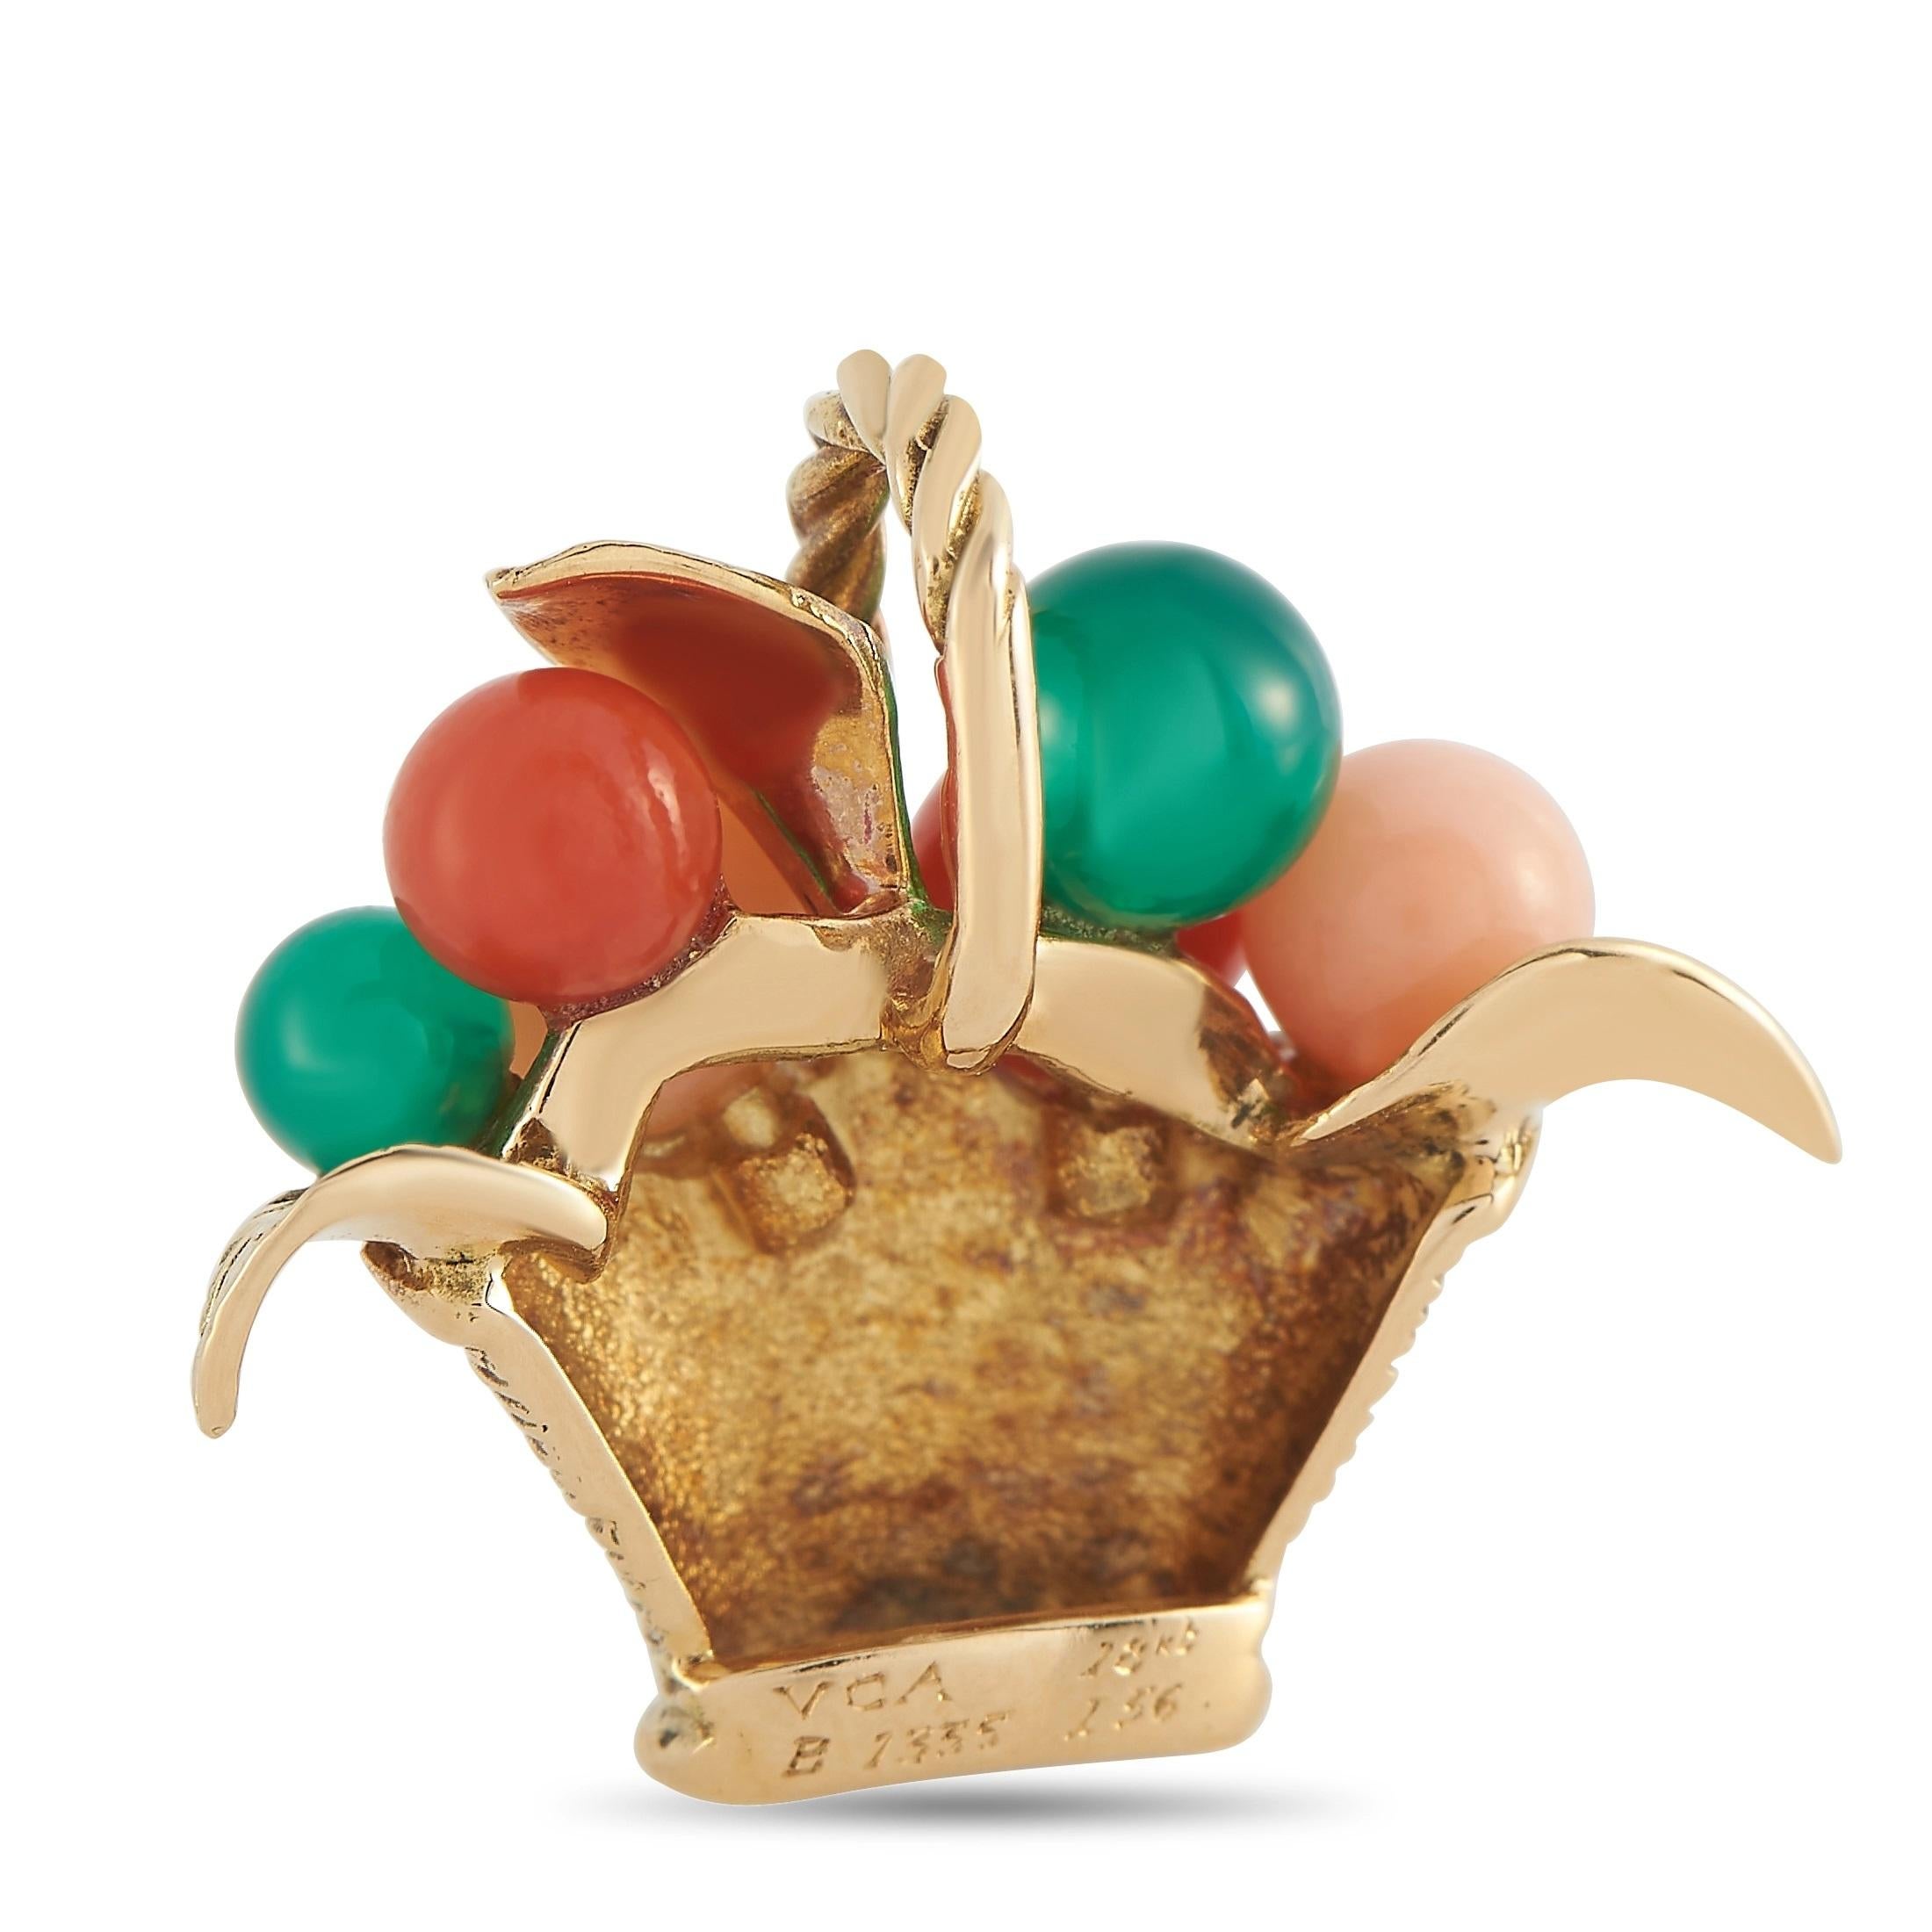 Although this Van Cleef & Arpels measures only 0.65” long and 0.88” wide, it’s charming beyond measure. An 18K Yellow Gold basket and leaves add a touch of luxury to this impeccable vintage charm, but it’s the Coral and Chrysoprase orbs that infuse